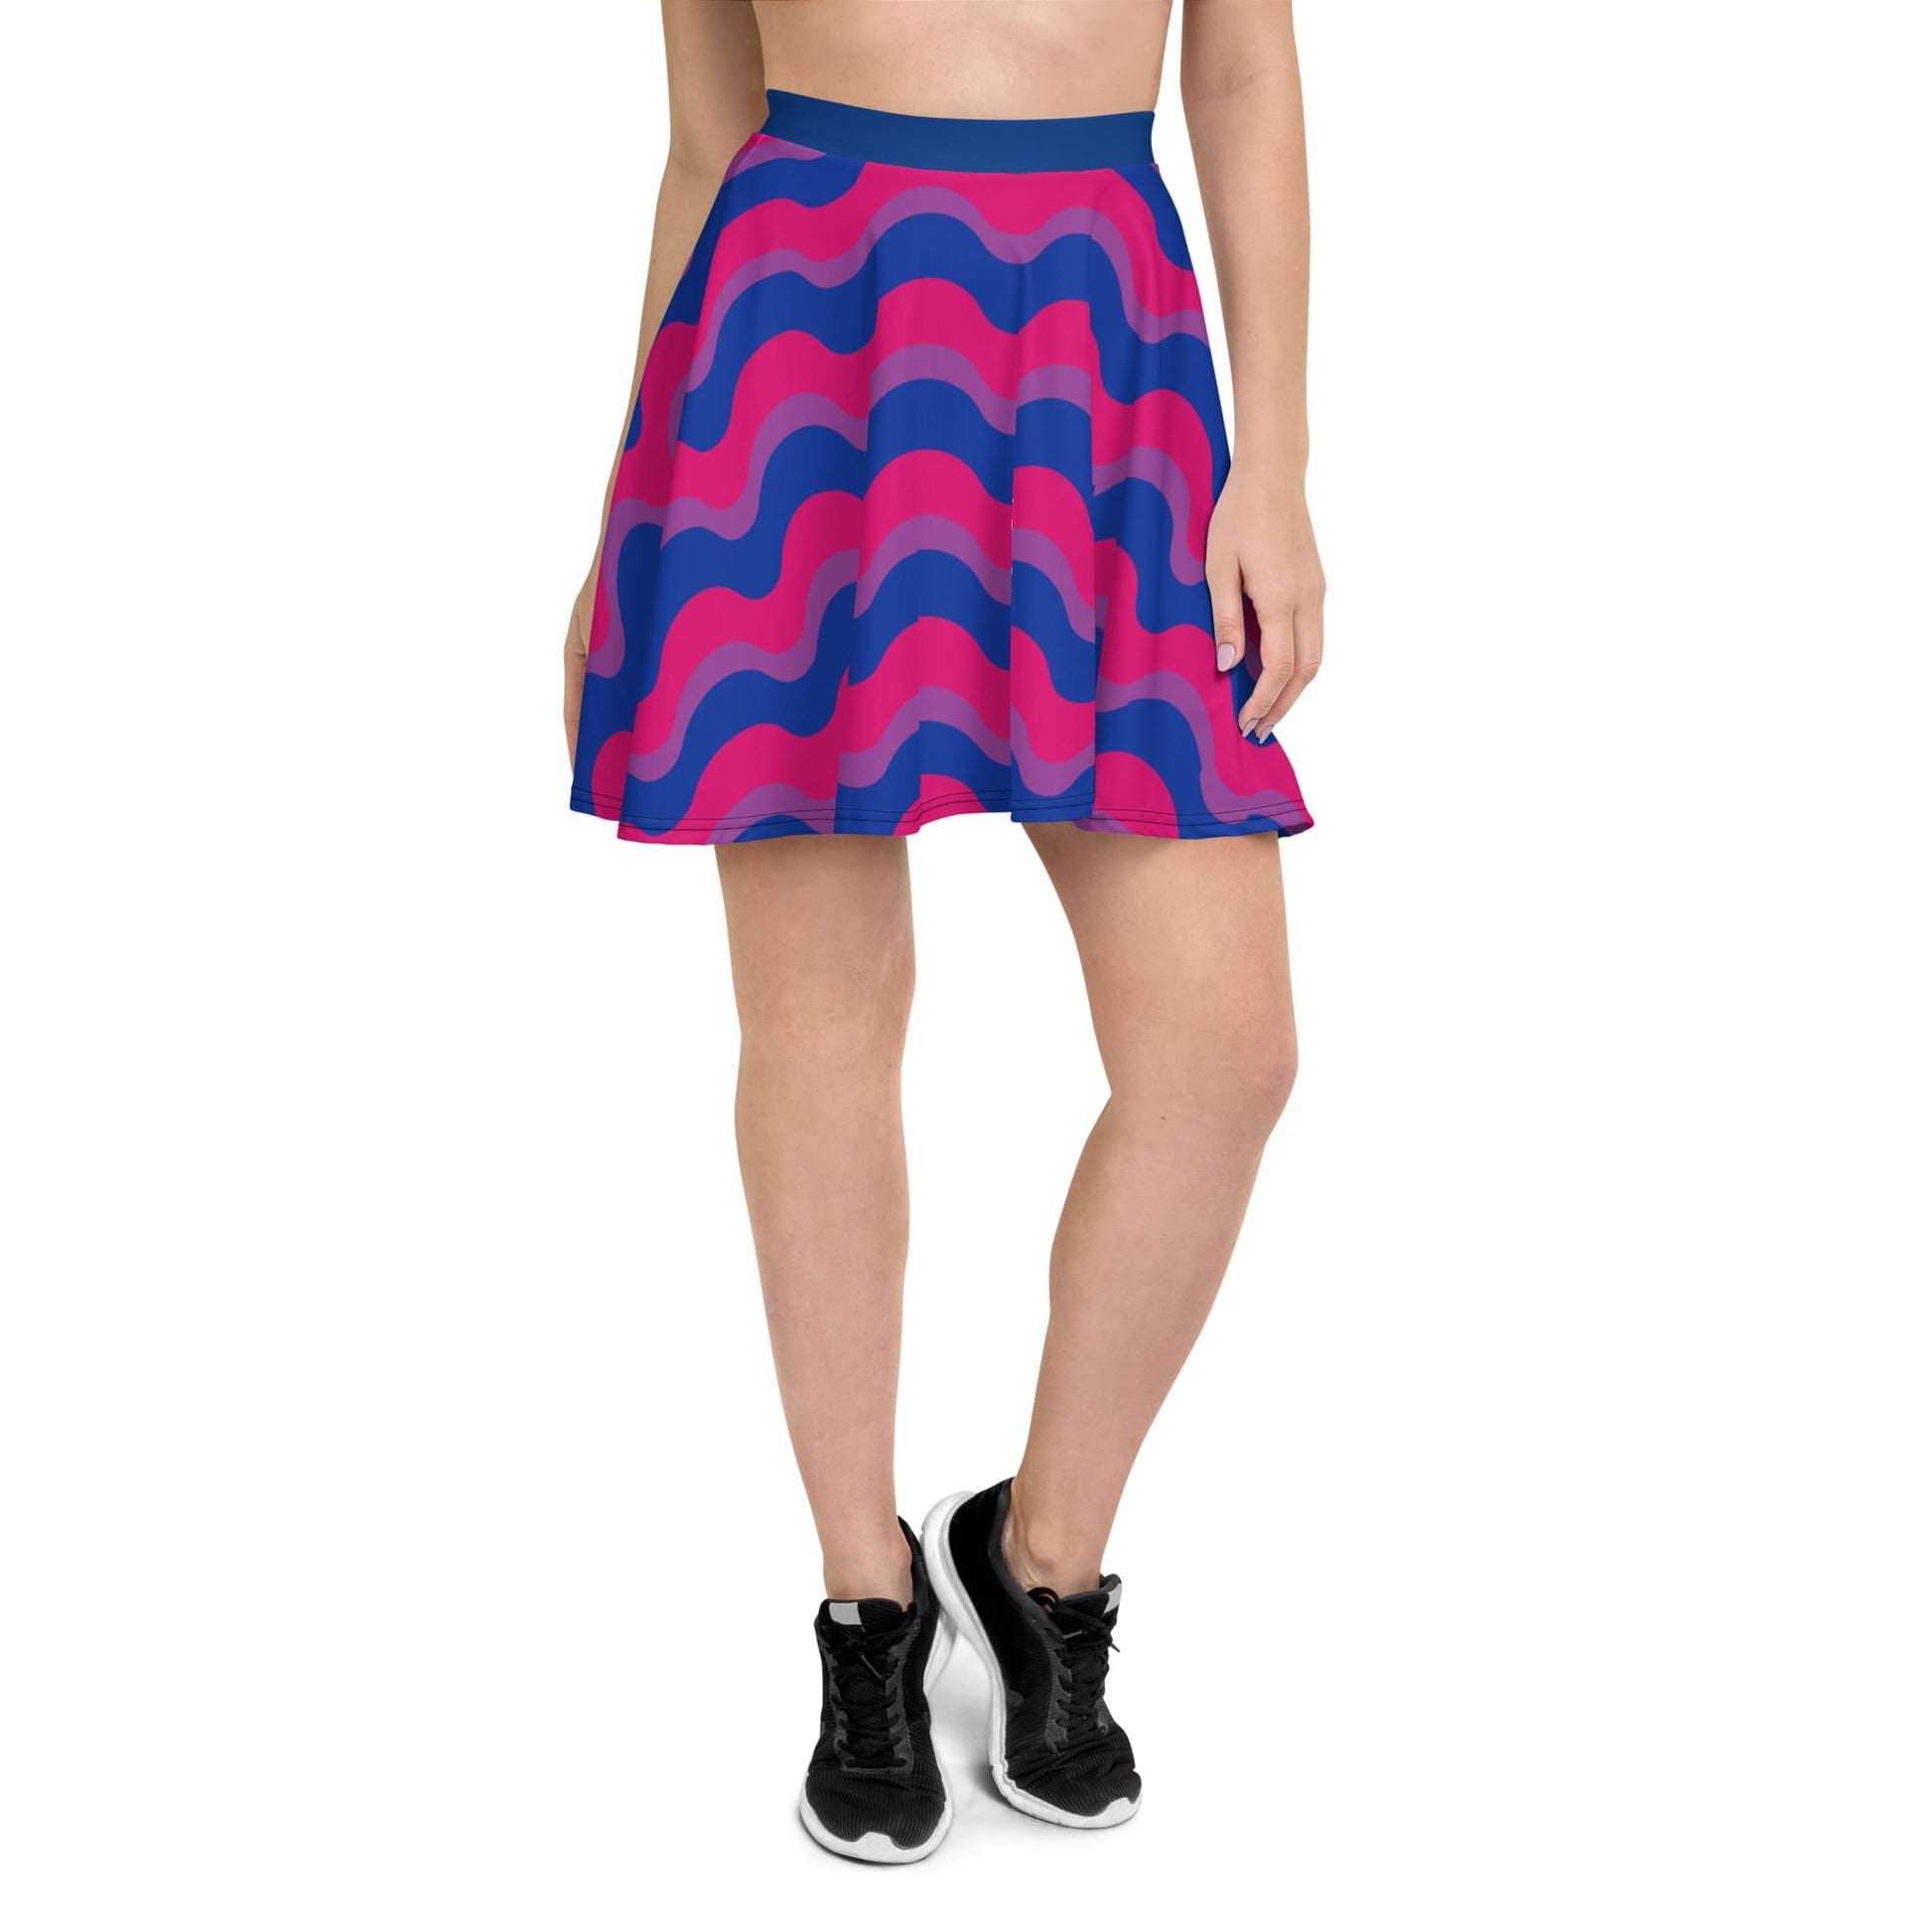 bisexual skirt, front